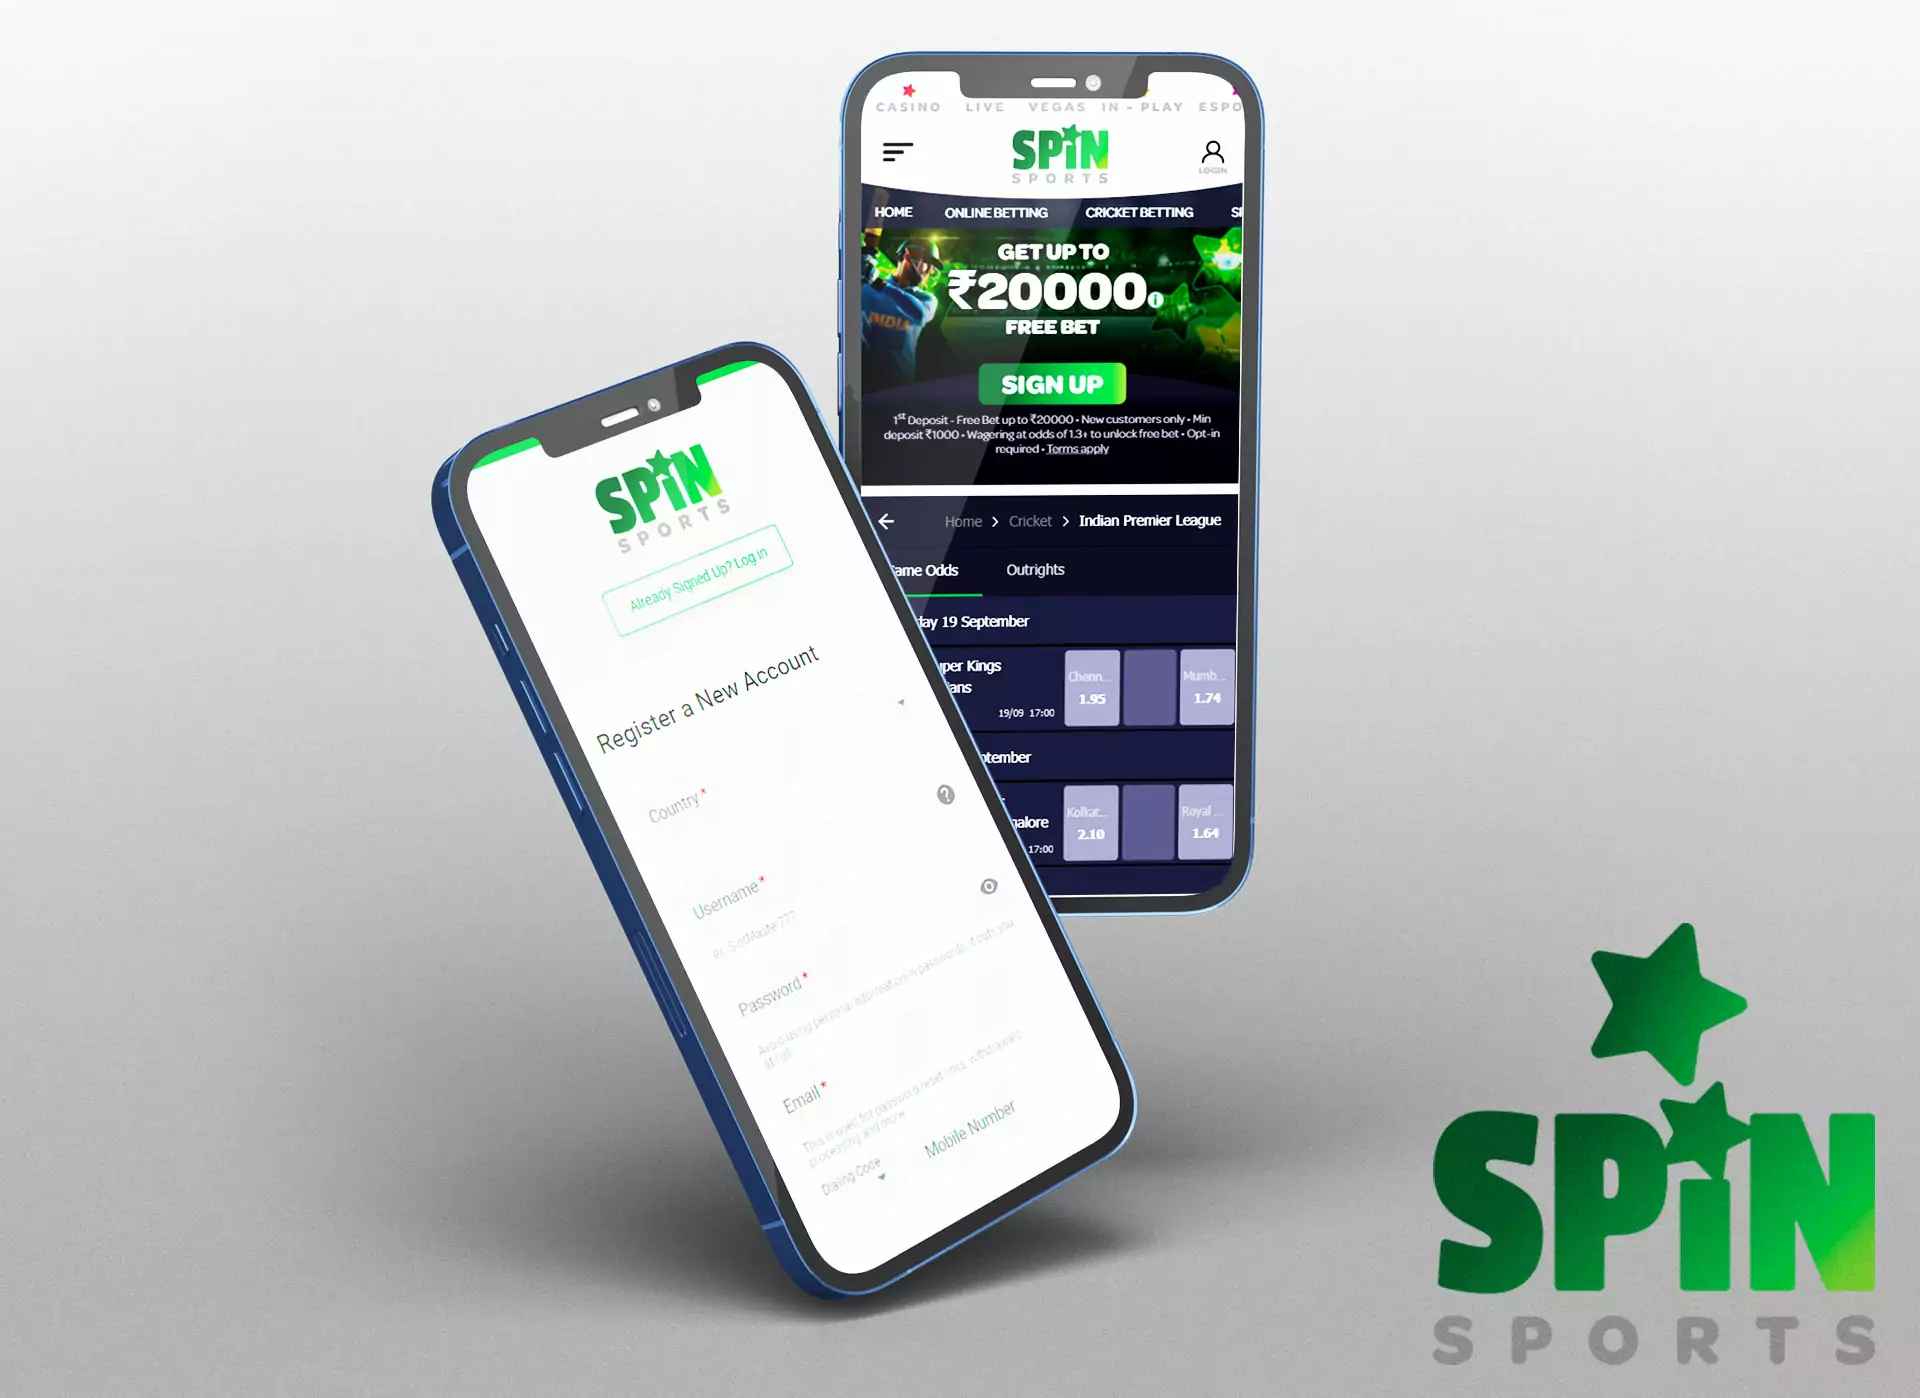 Register in the Spin Sports app and place bets whenever you want.